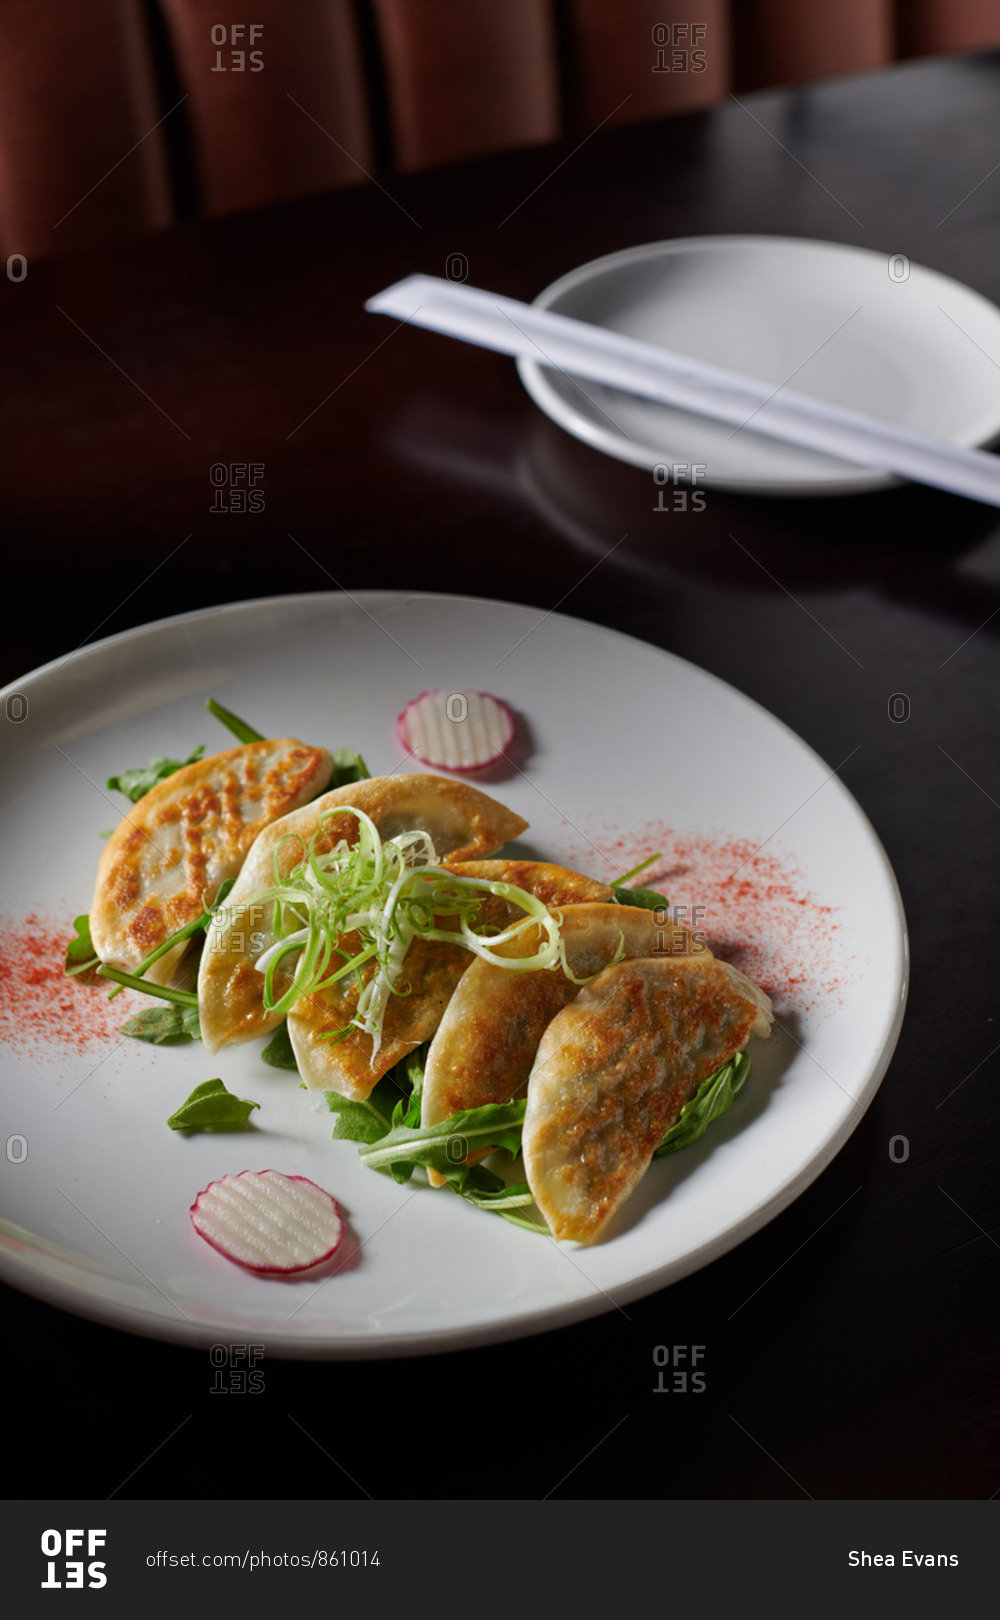 Pan seared pot stickers served at a Korean Restaurant garnished with arugula, radish and green onions